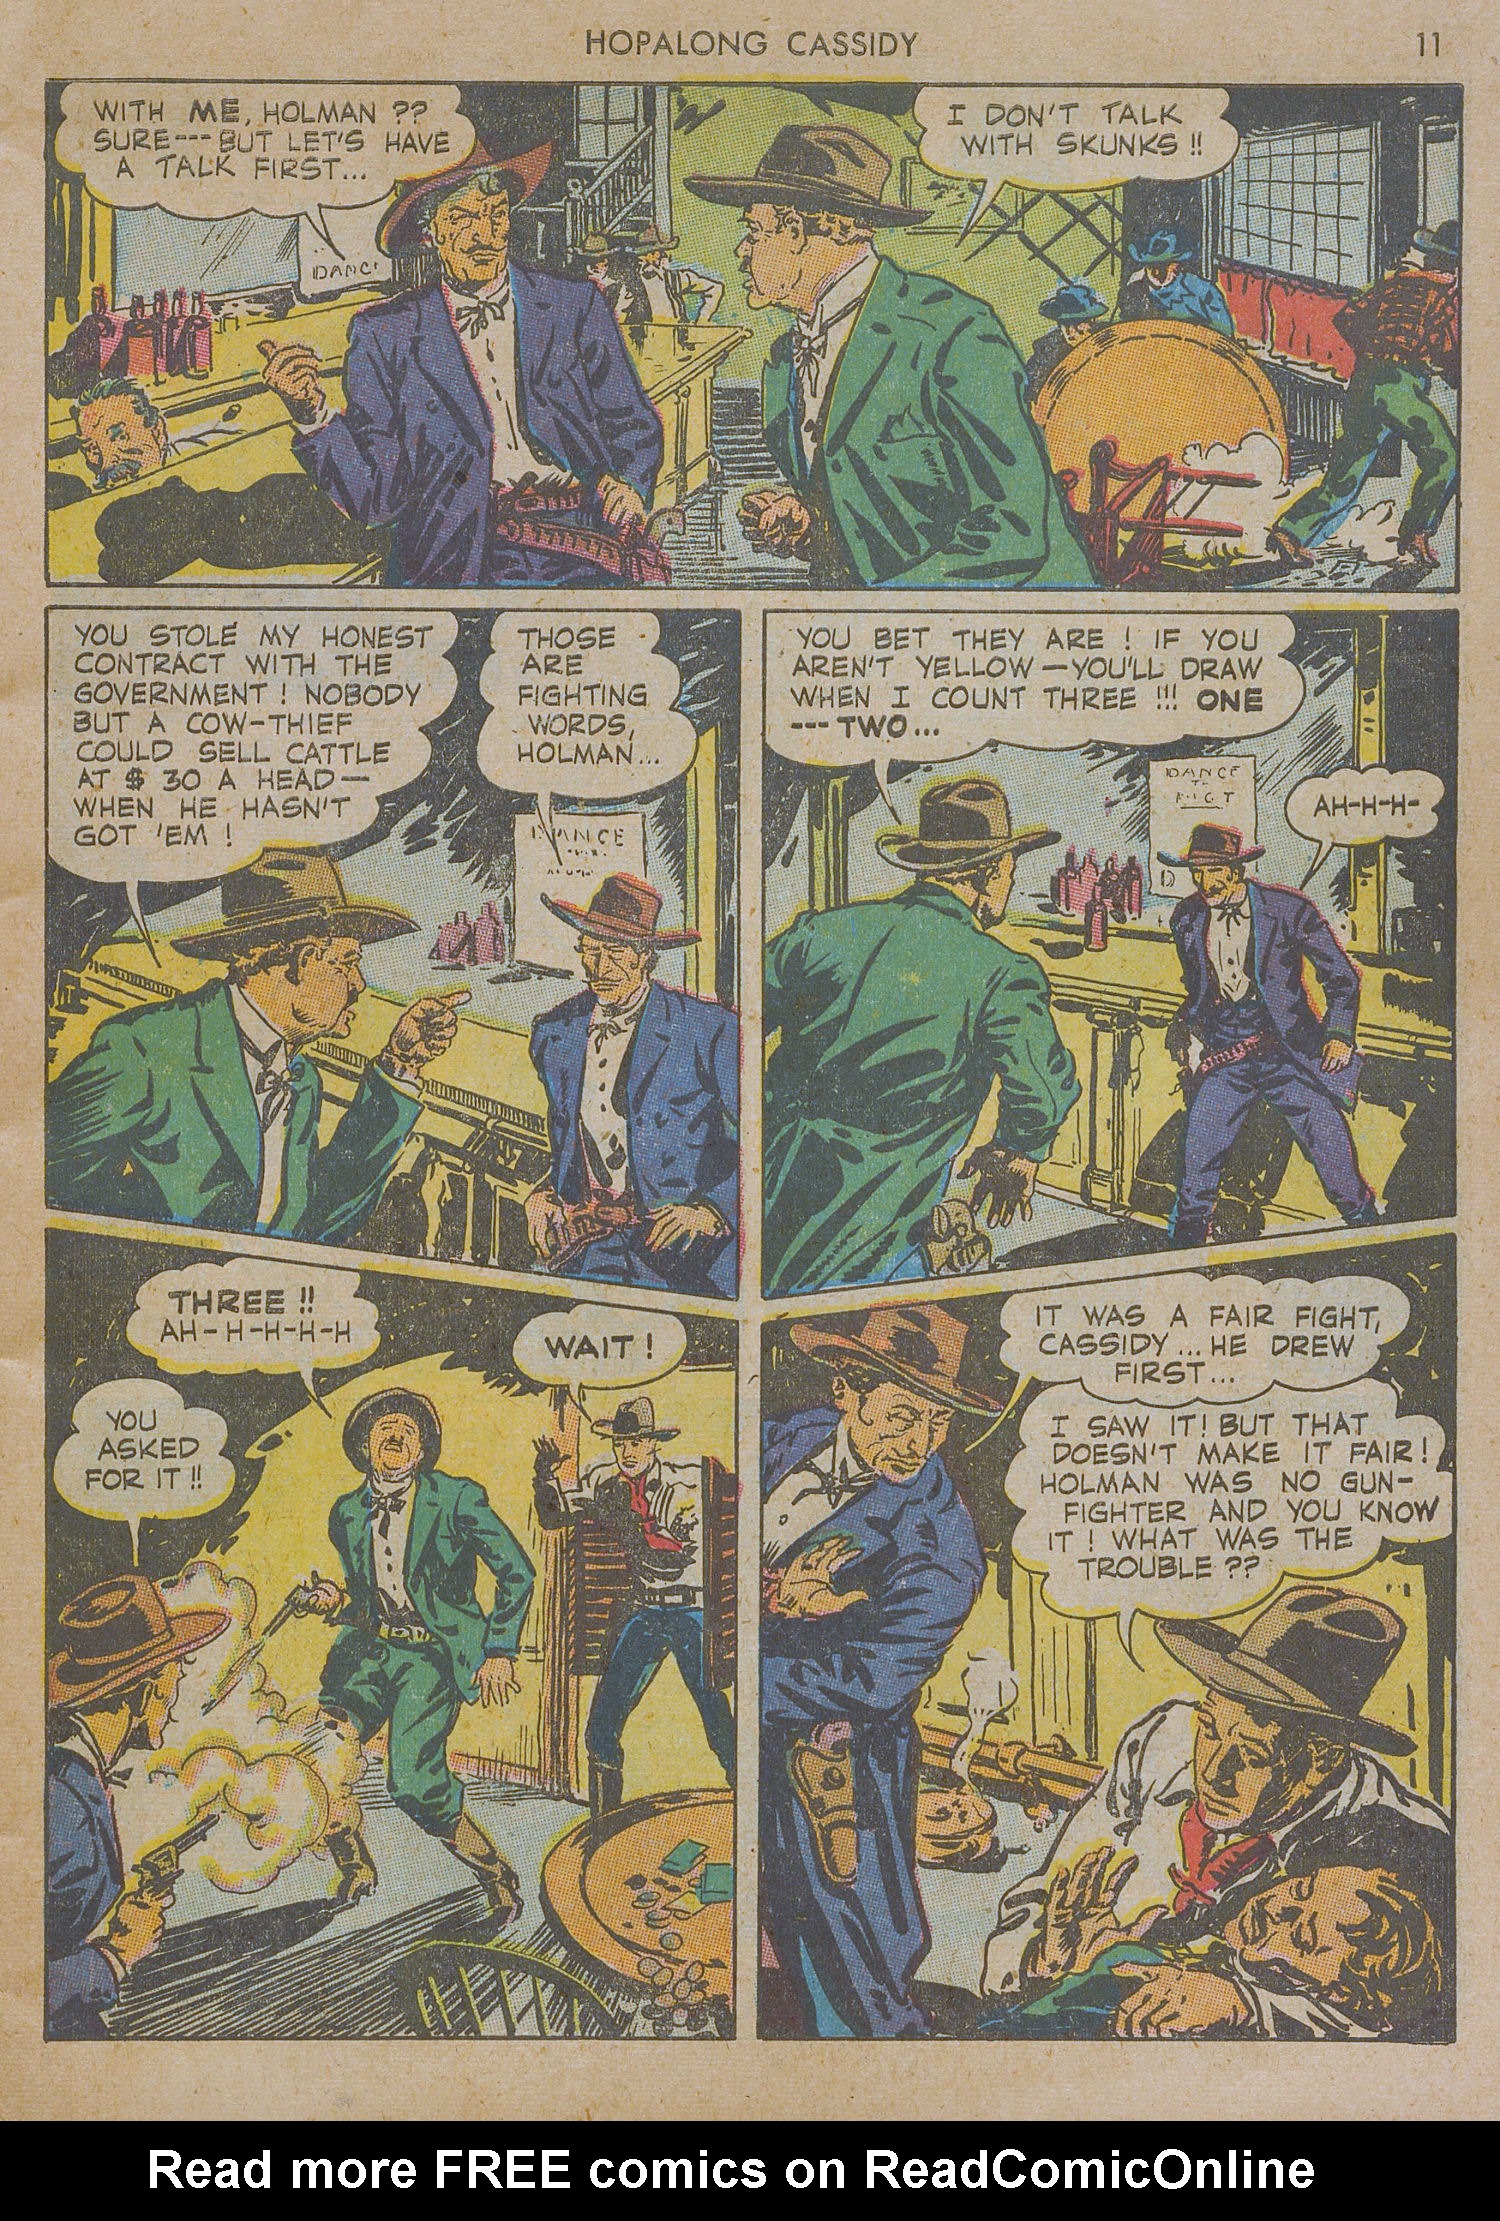 Read online Hopalong Cassidy comic -  Issue #1 - 11